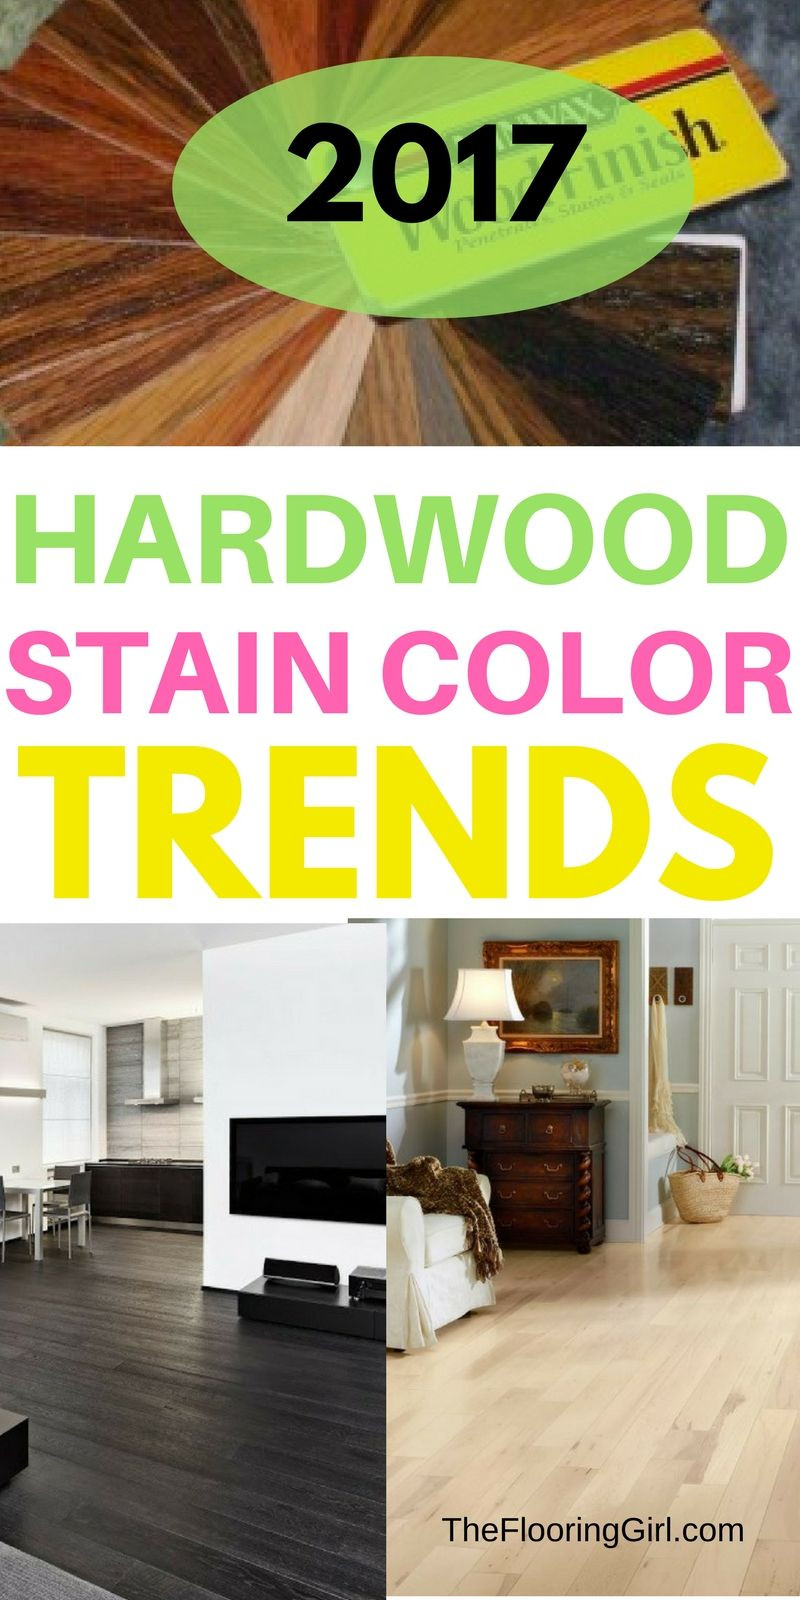 11 Stylish How Much Does Refinishing A Hardwood Floor Cost 2024 free download how much does refinishing a hardwood floor cost of hardwood flooring stain color trends 2018 more from the flooring throughout hardwood flooring stain color trends for 2017 hardwood colors t